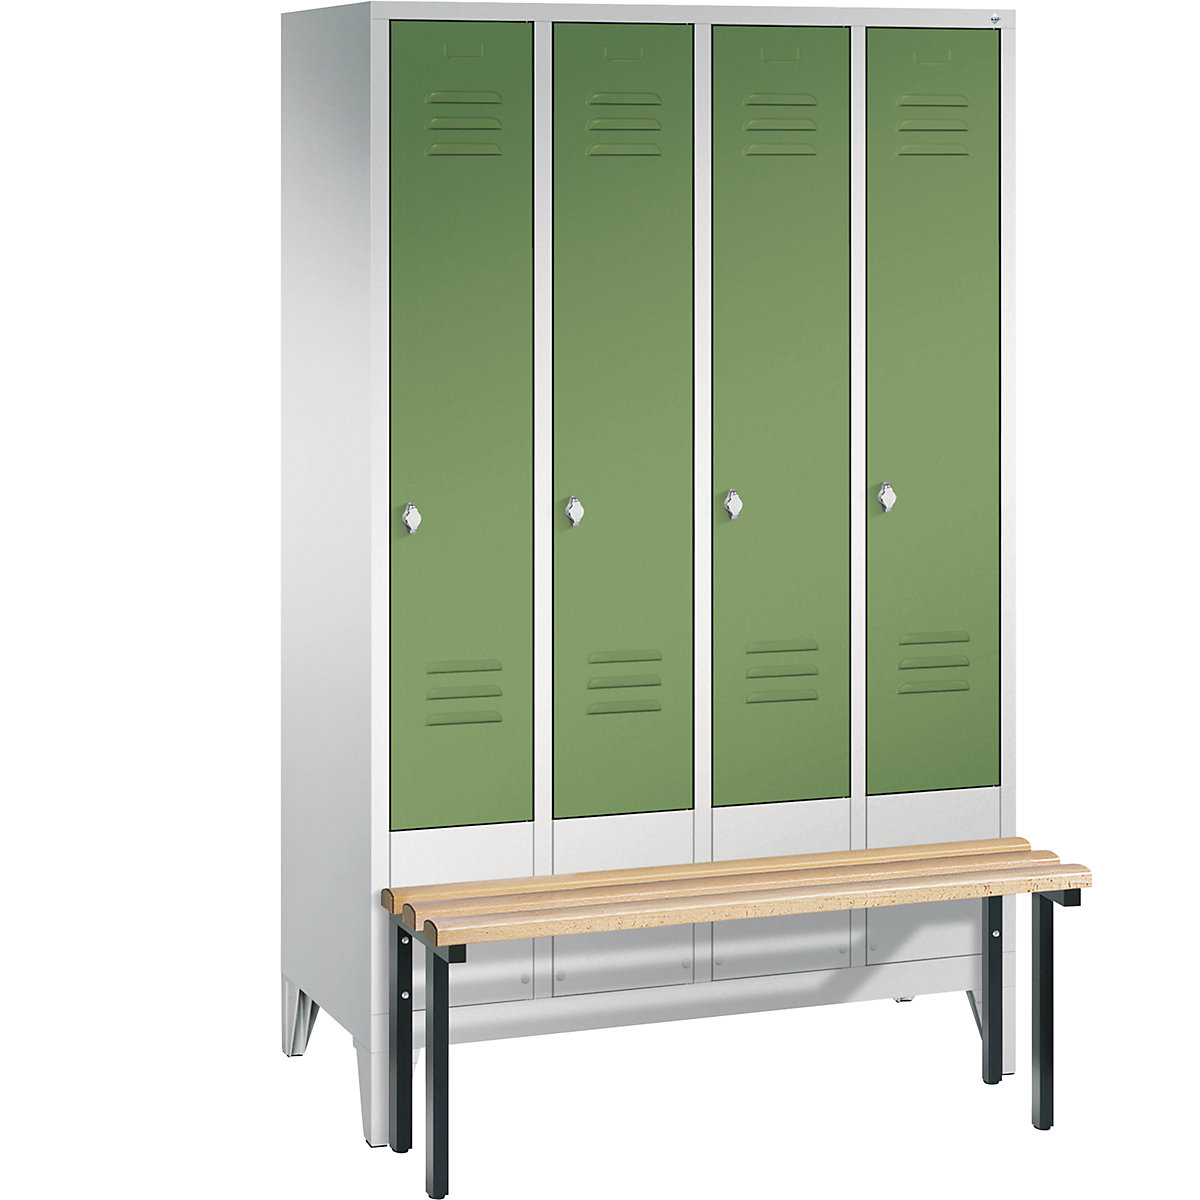 CLASSIC cloakroom locker with bench mounted in front – C+P, 4 compartments, compartment width 300 mm, light grey / reseda green-2